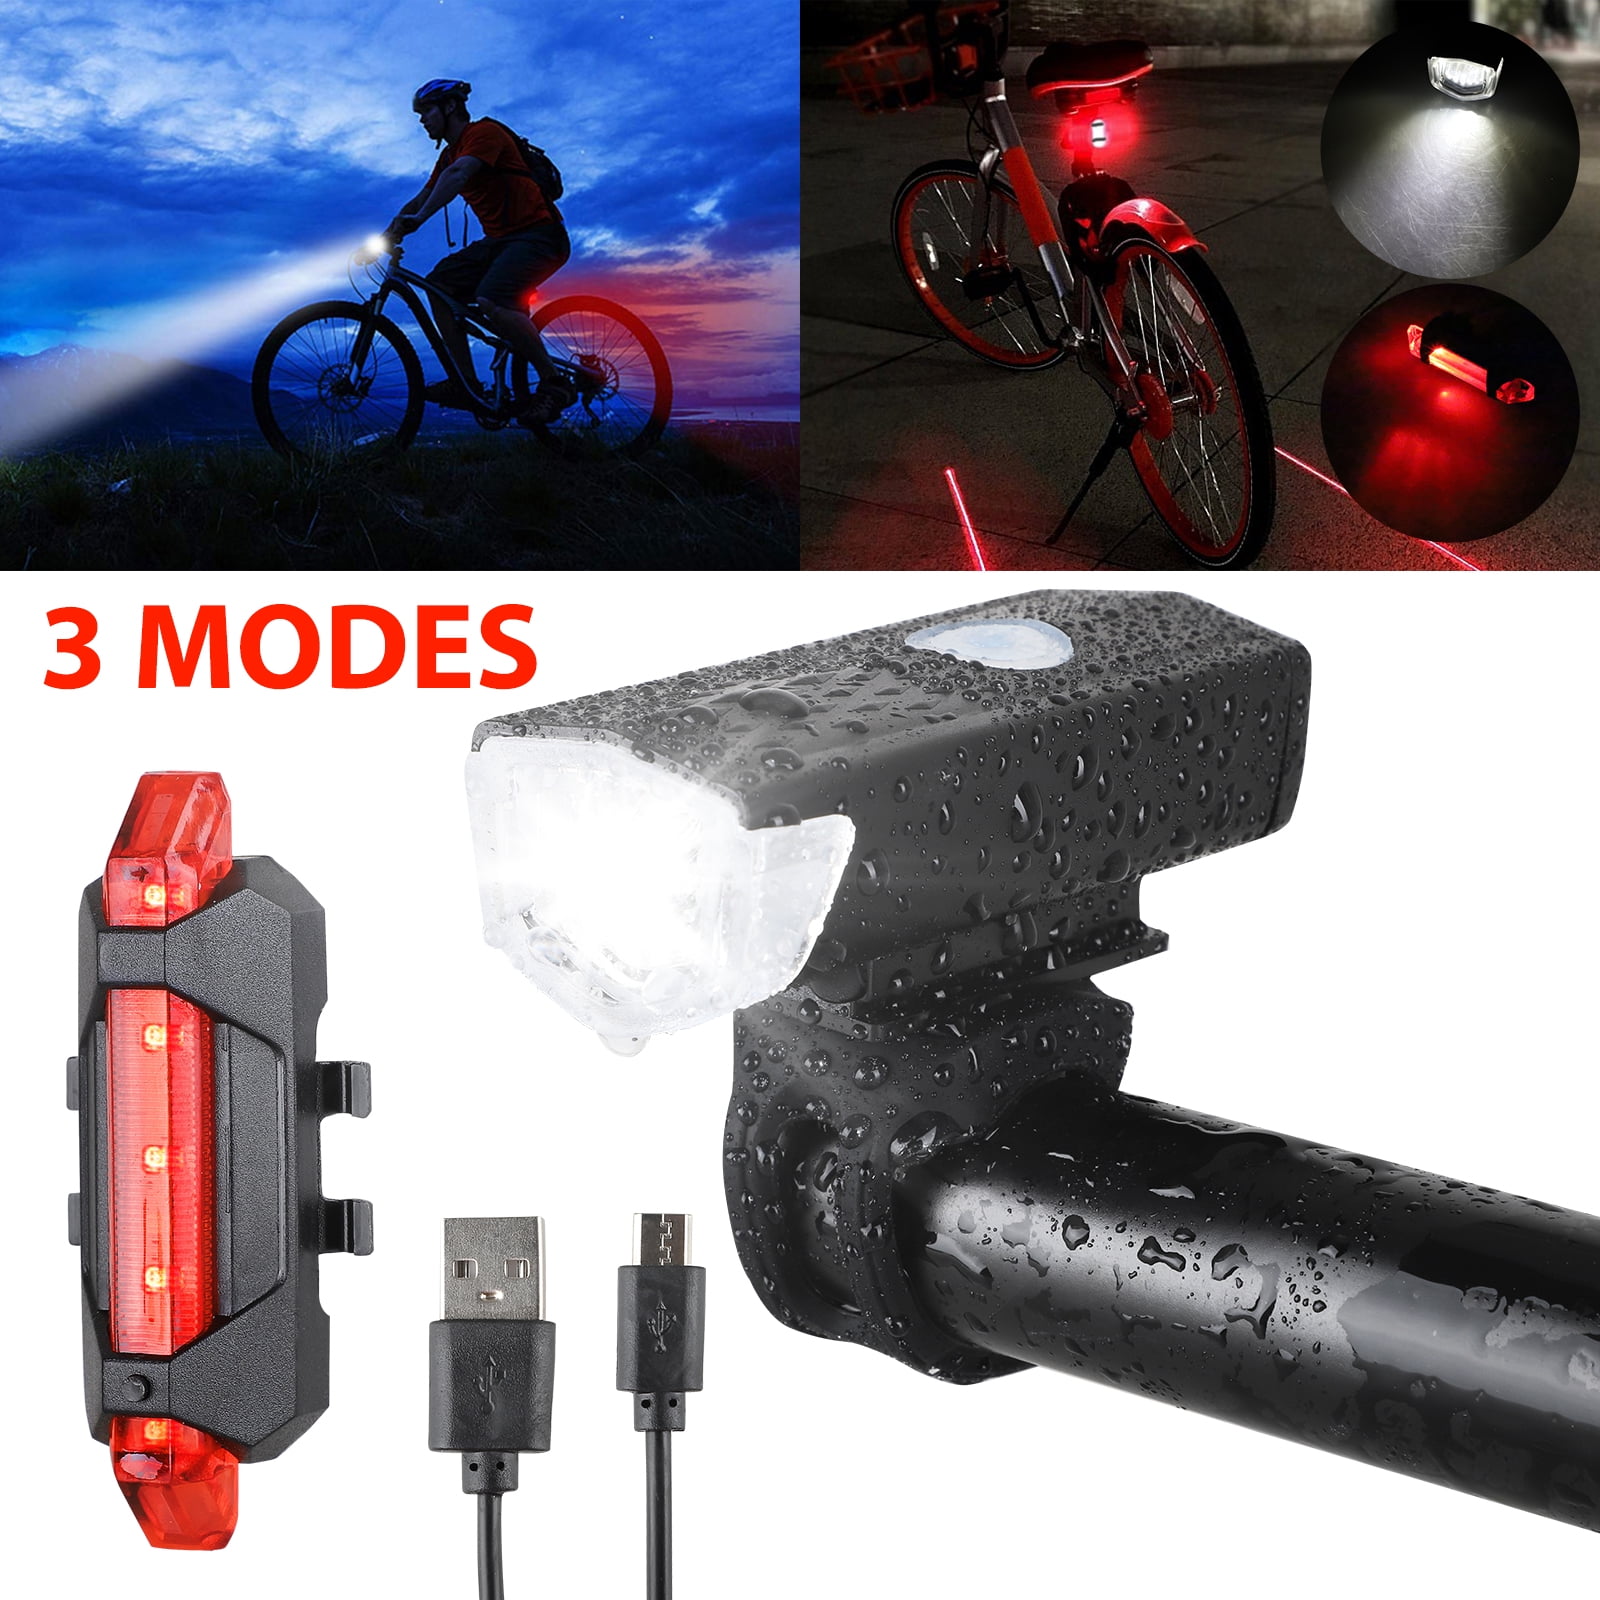 Metal linje Teasing lomme 800LM Bright Bicycle Lights, Waterproof Bike Head & Tail Light Set, USB  Rechargeable LED Bike Light, Cycling Headlight with 3 Modes and Adjustable  Bracket, 360º Visibility Bicycle Safety Accessories - Walmart.com